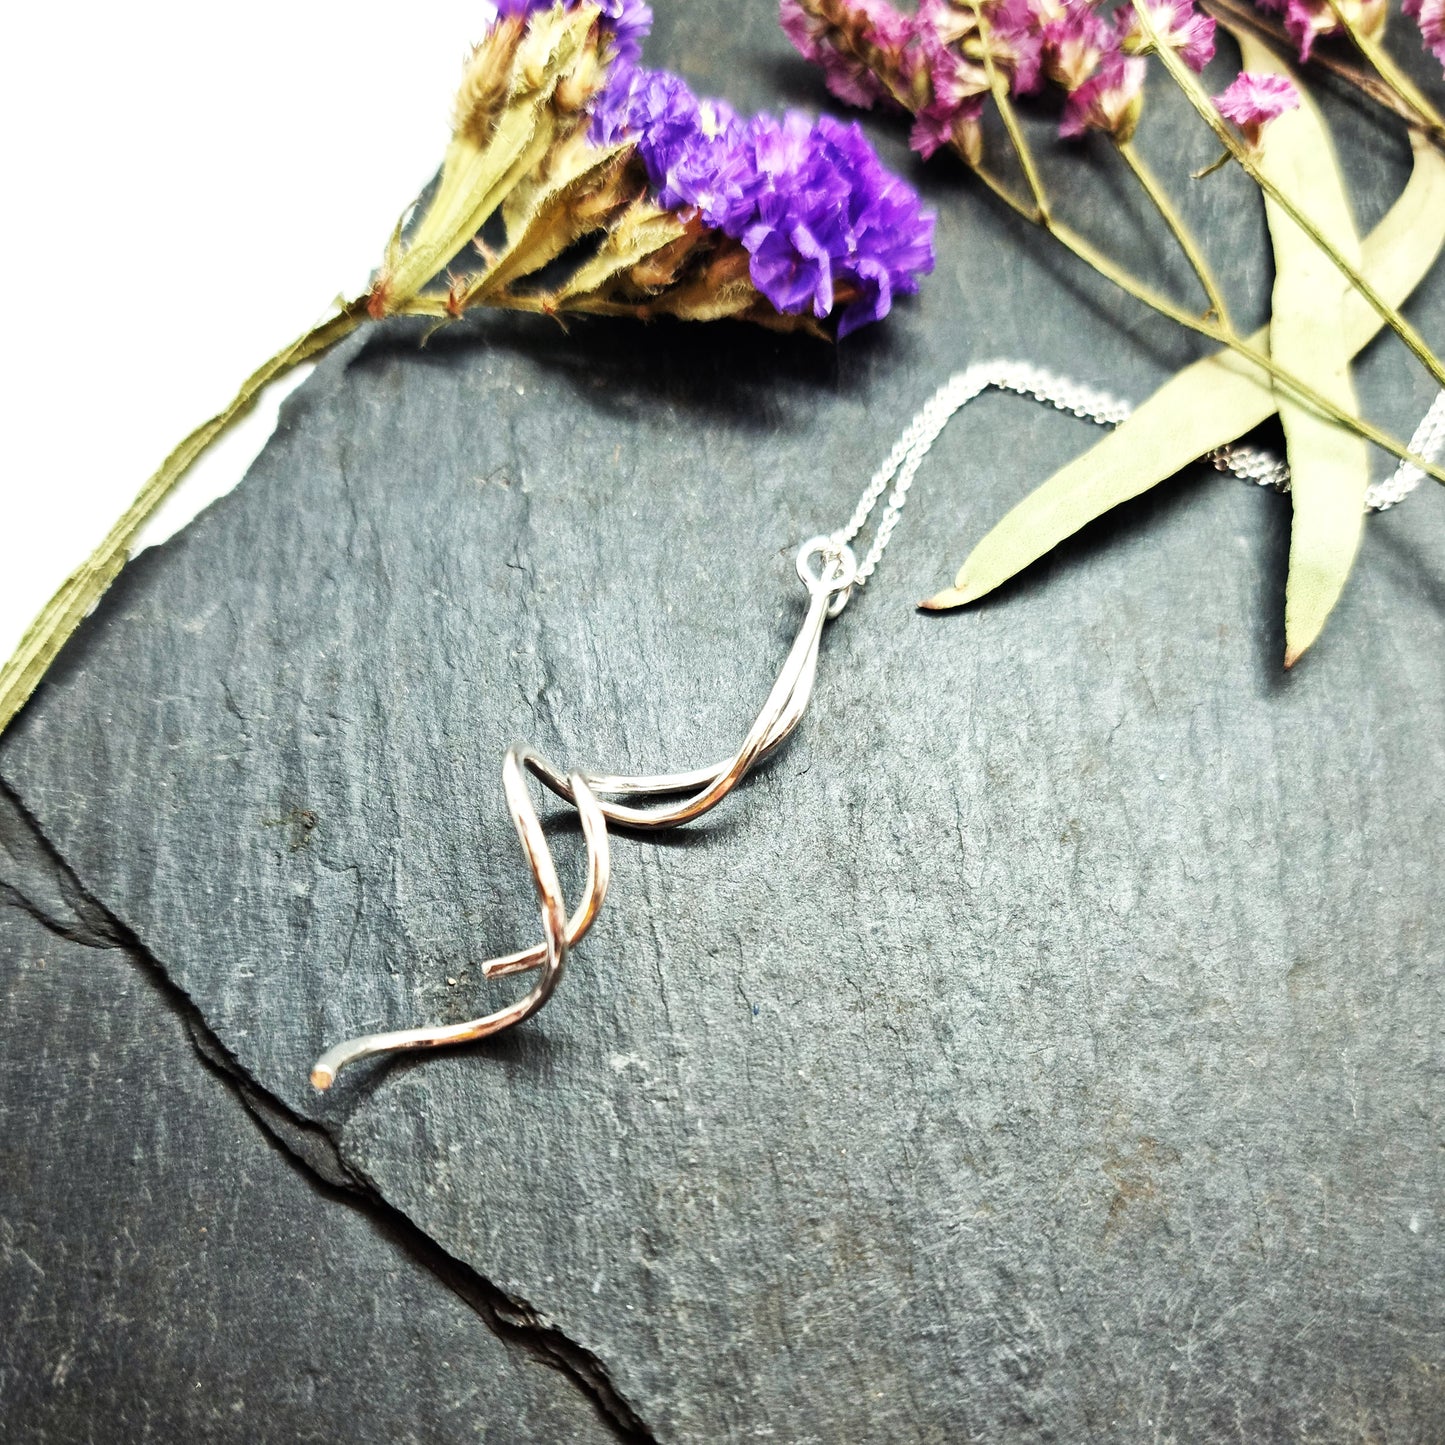 A silver twist pendant with 2 strands intertwined suspended from a silver chain. Shown on slate with flowers